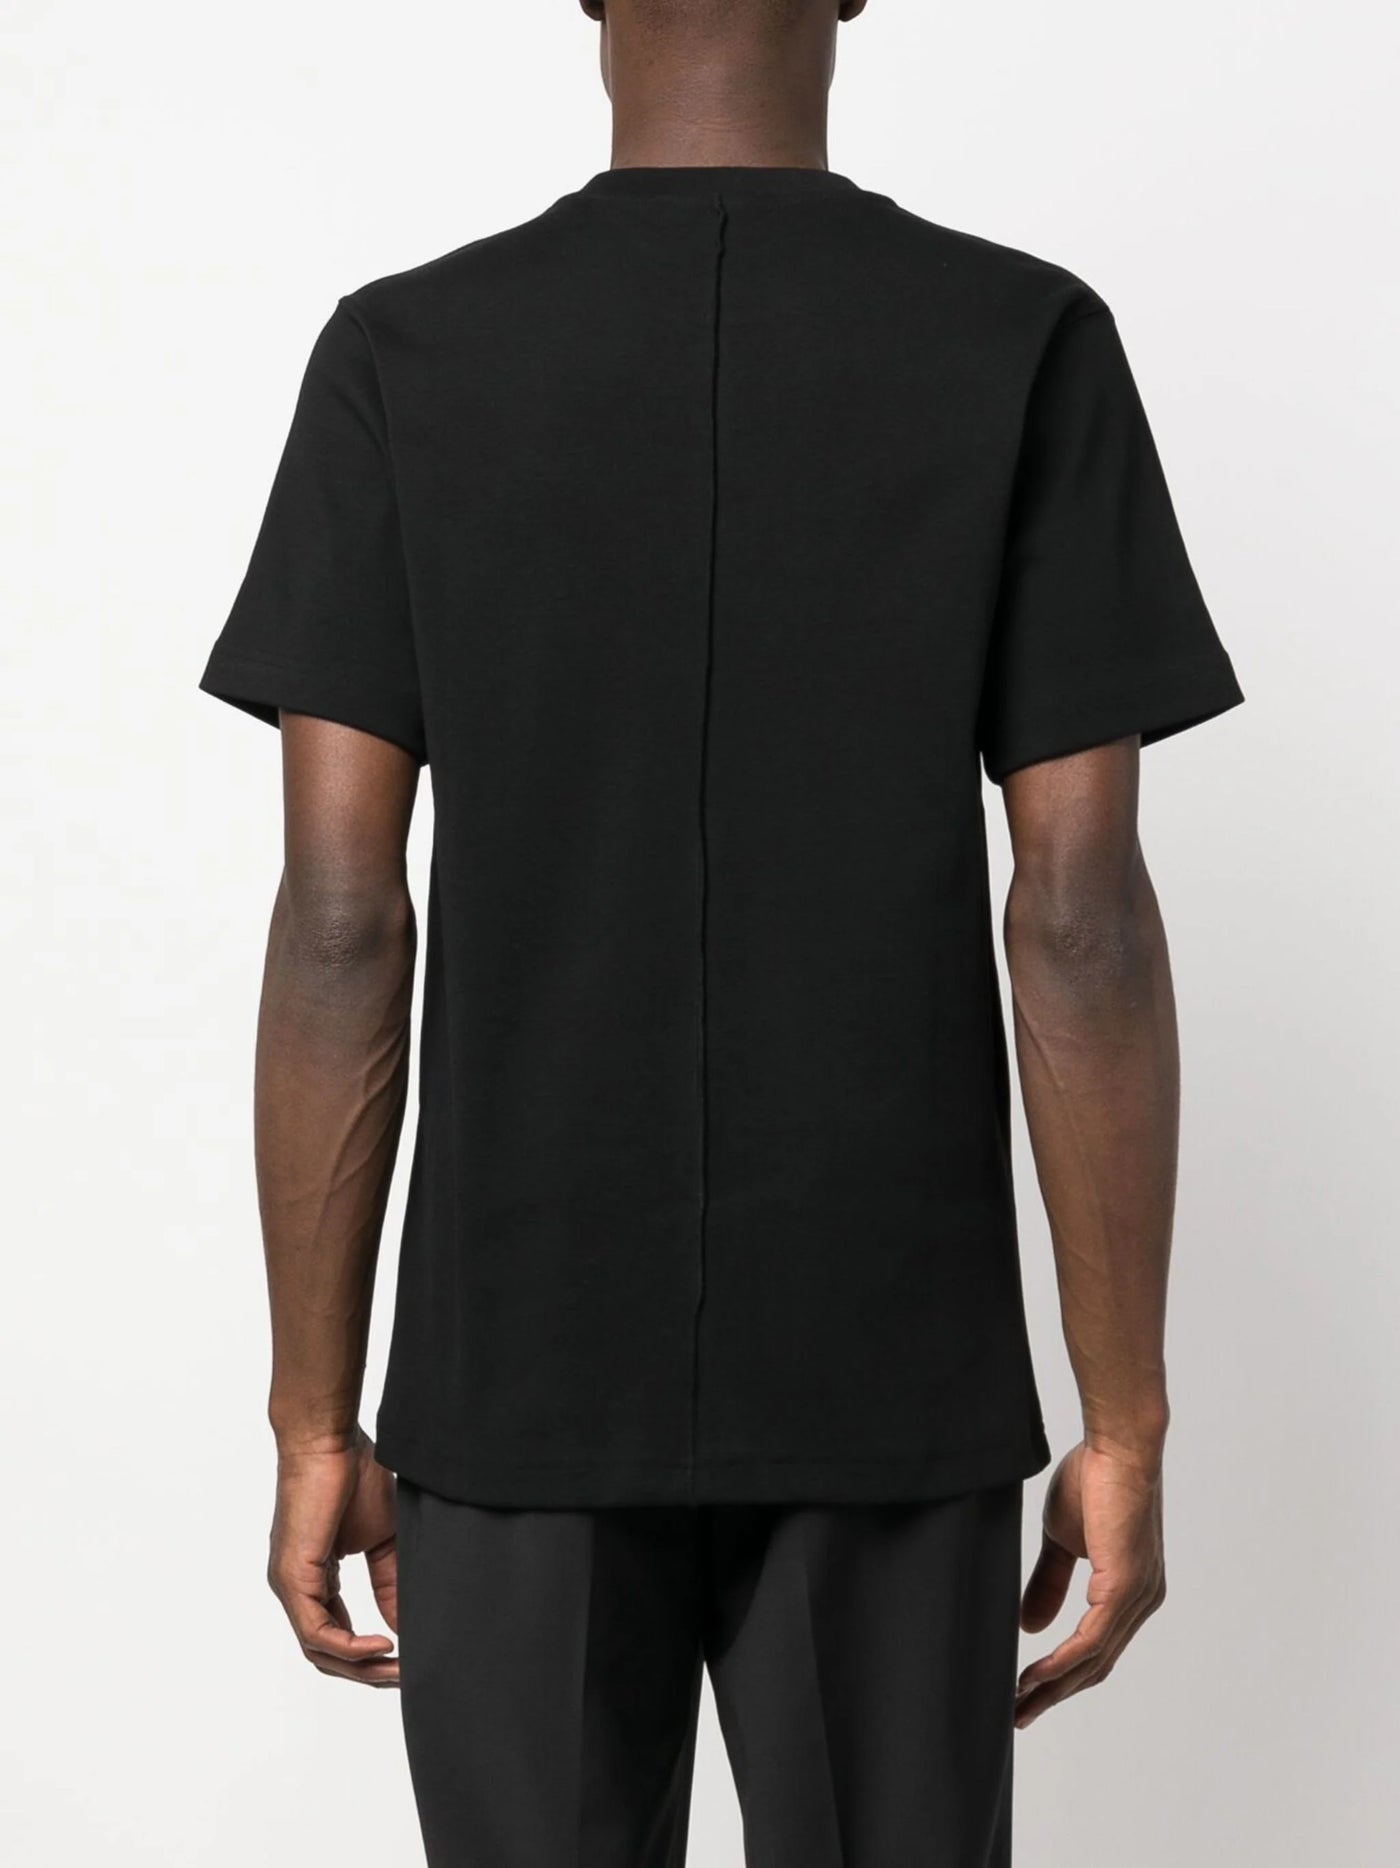 Helmut Lang logo-embroidered cotton T-shirt